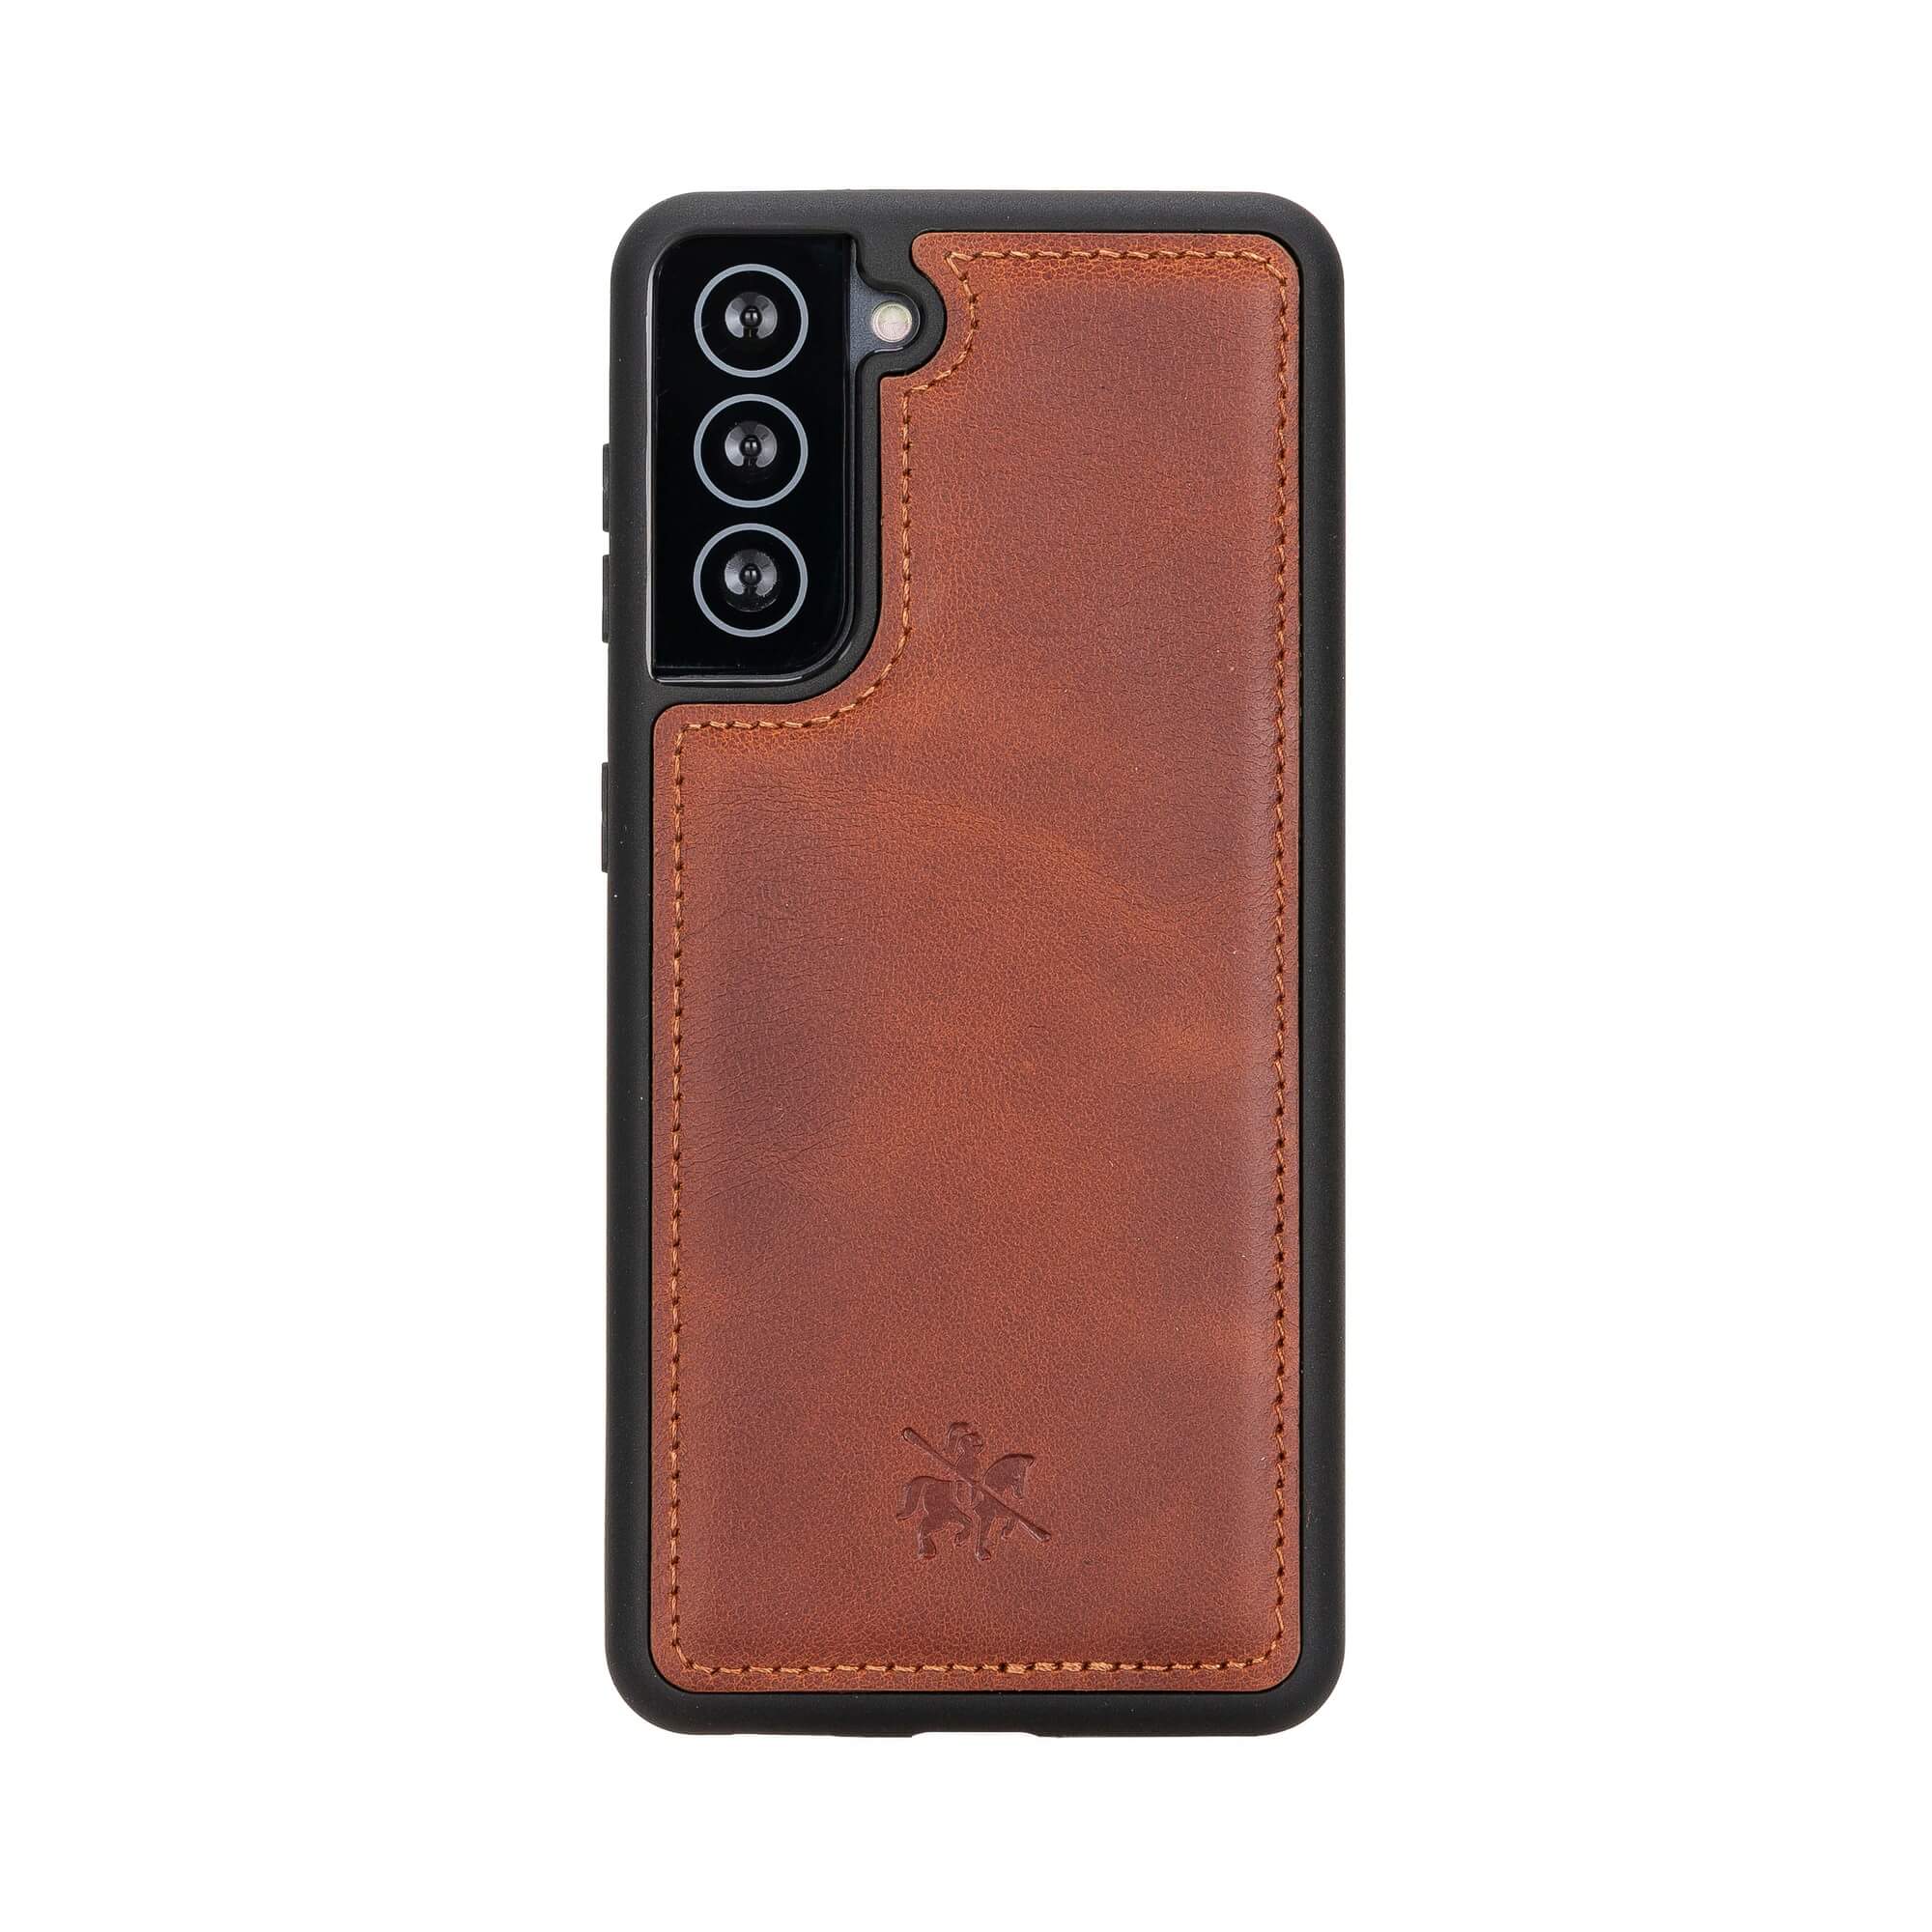 Venito Lucca Leather Case Compatible with Samsung Galaxy S21 (6.2 inch) – Extra Secure with Padded Back Cover (Antique Brown)